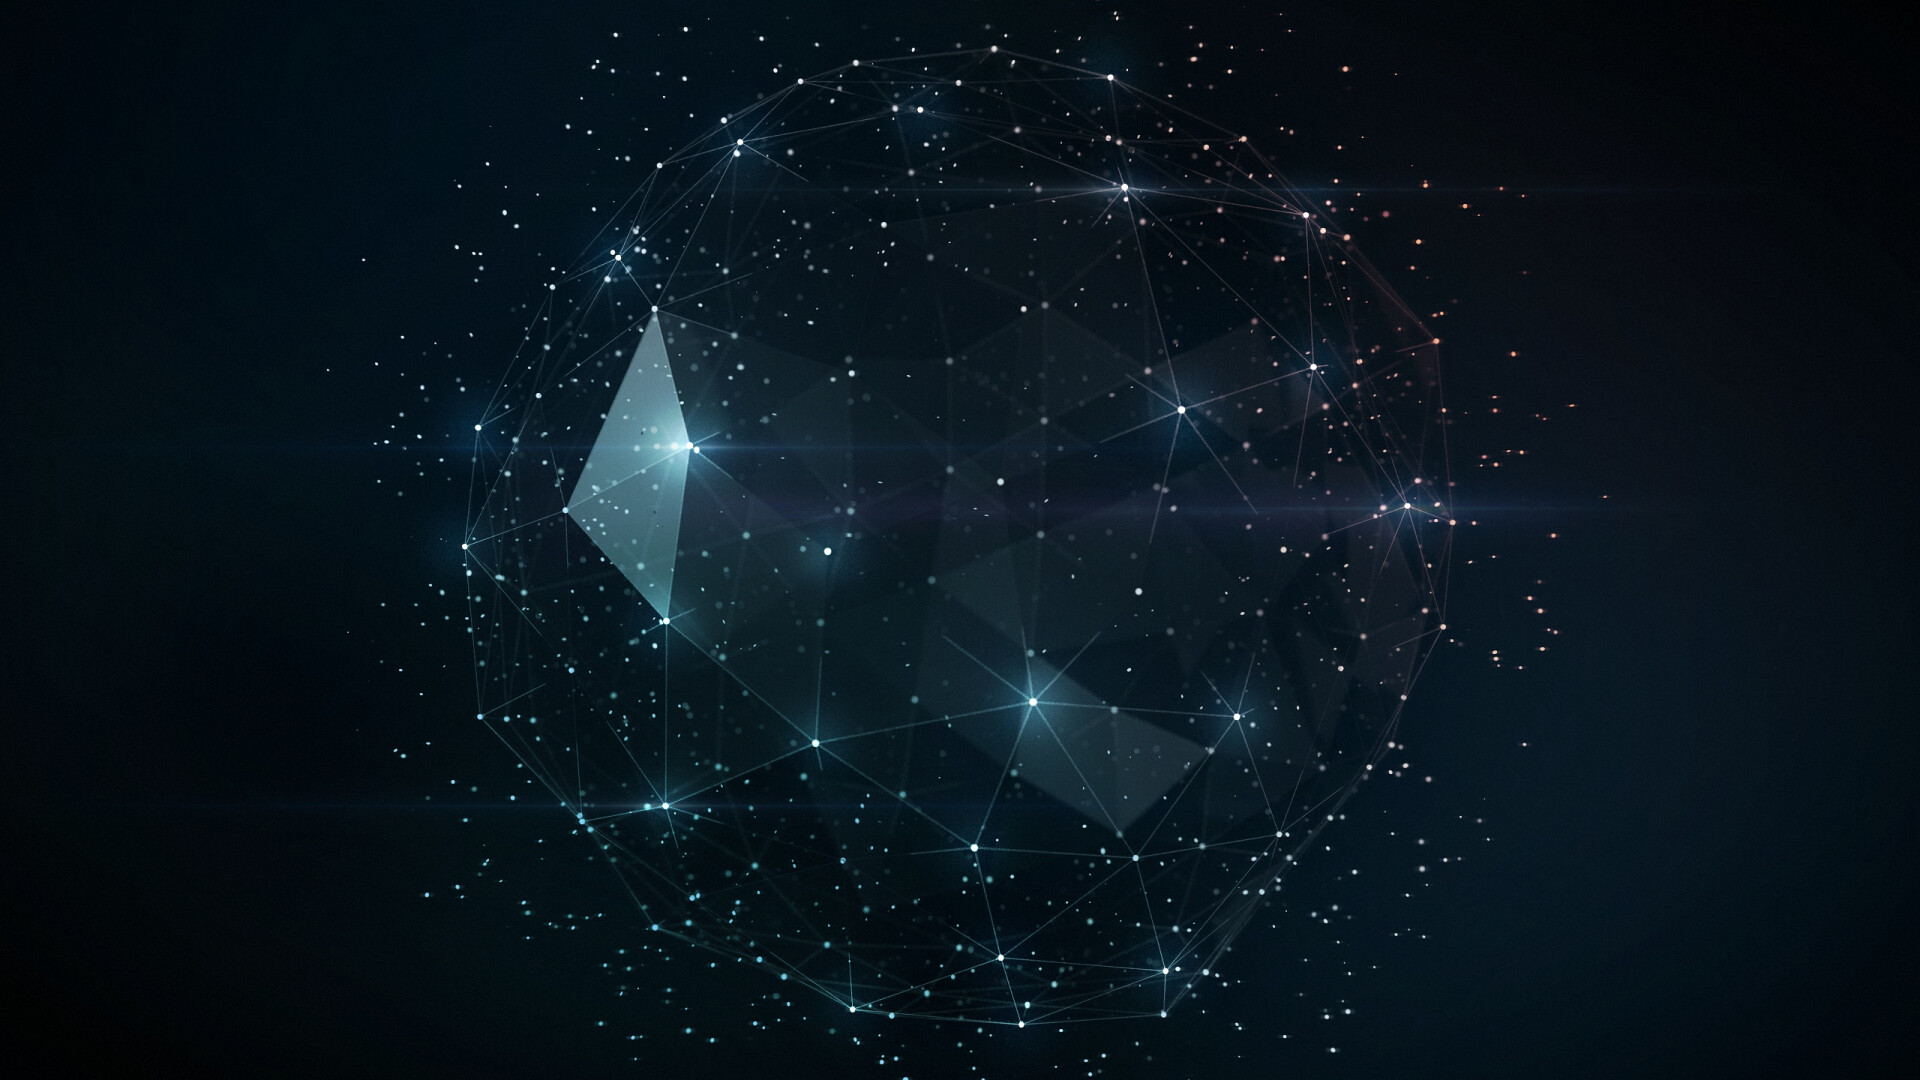 Geometric Abstract: Outer space ornament, Dots, Line segments, Angles. 1920x1080 Full HD Wallpaper.